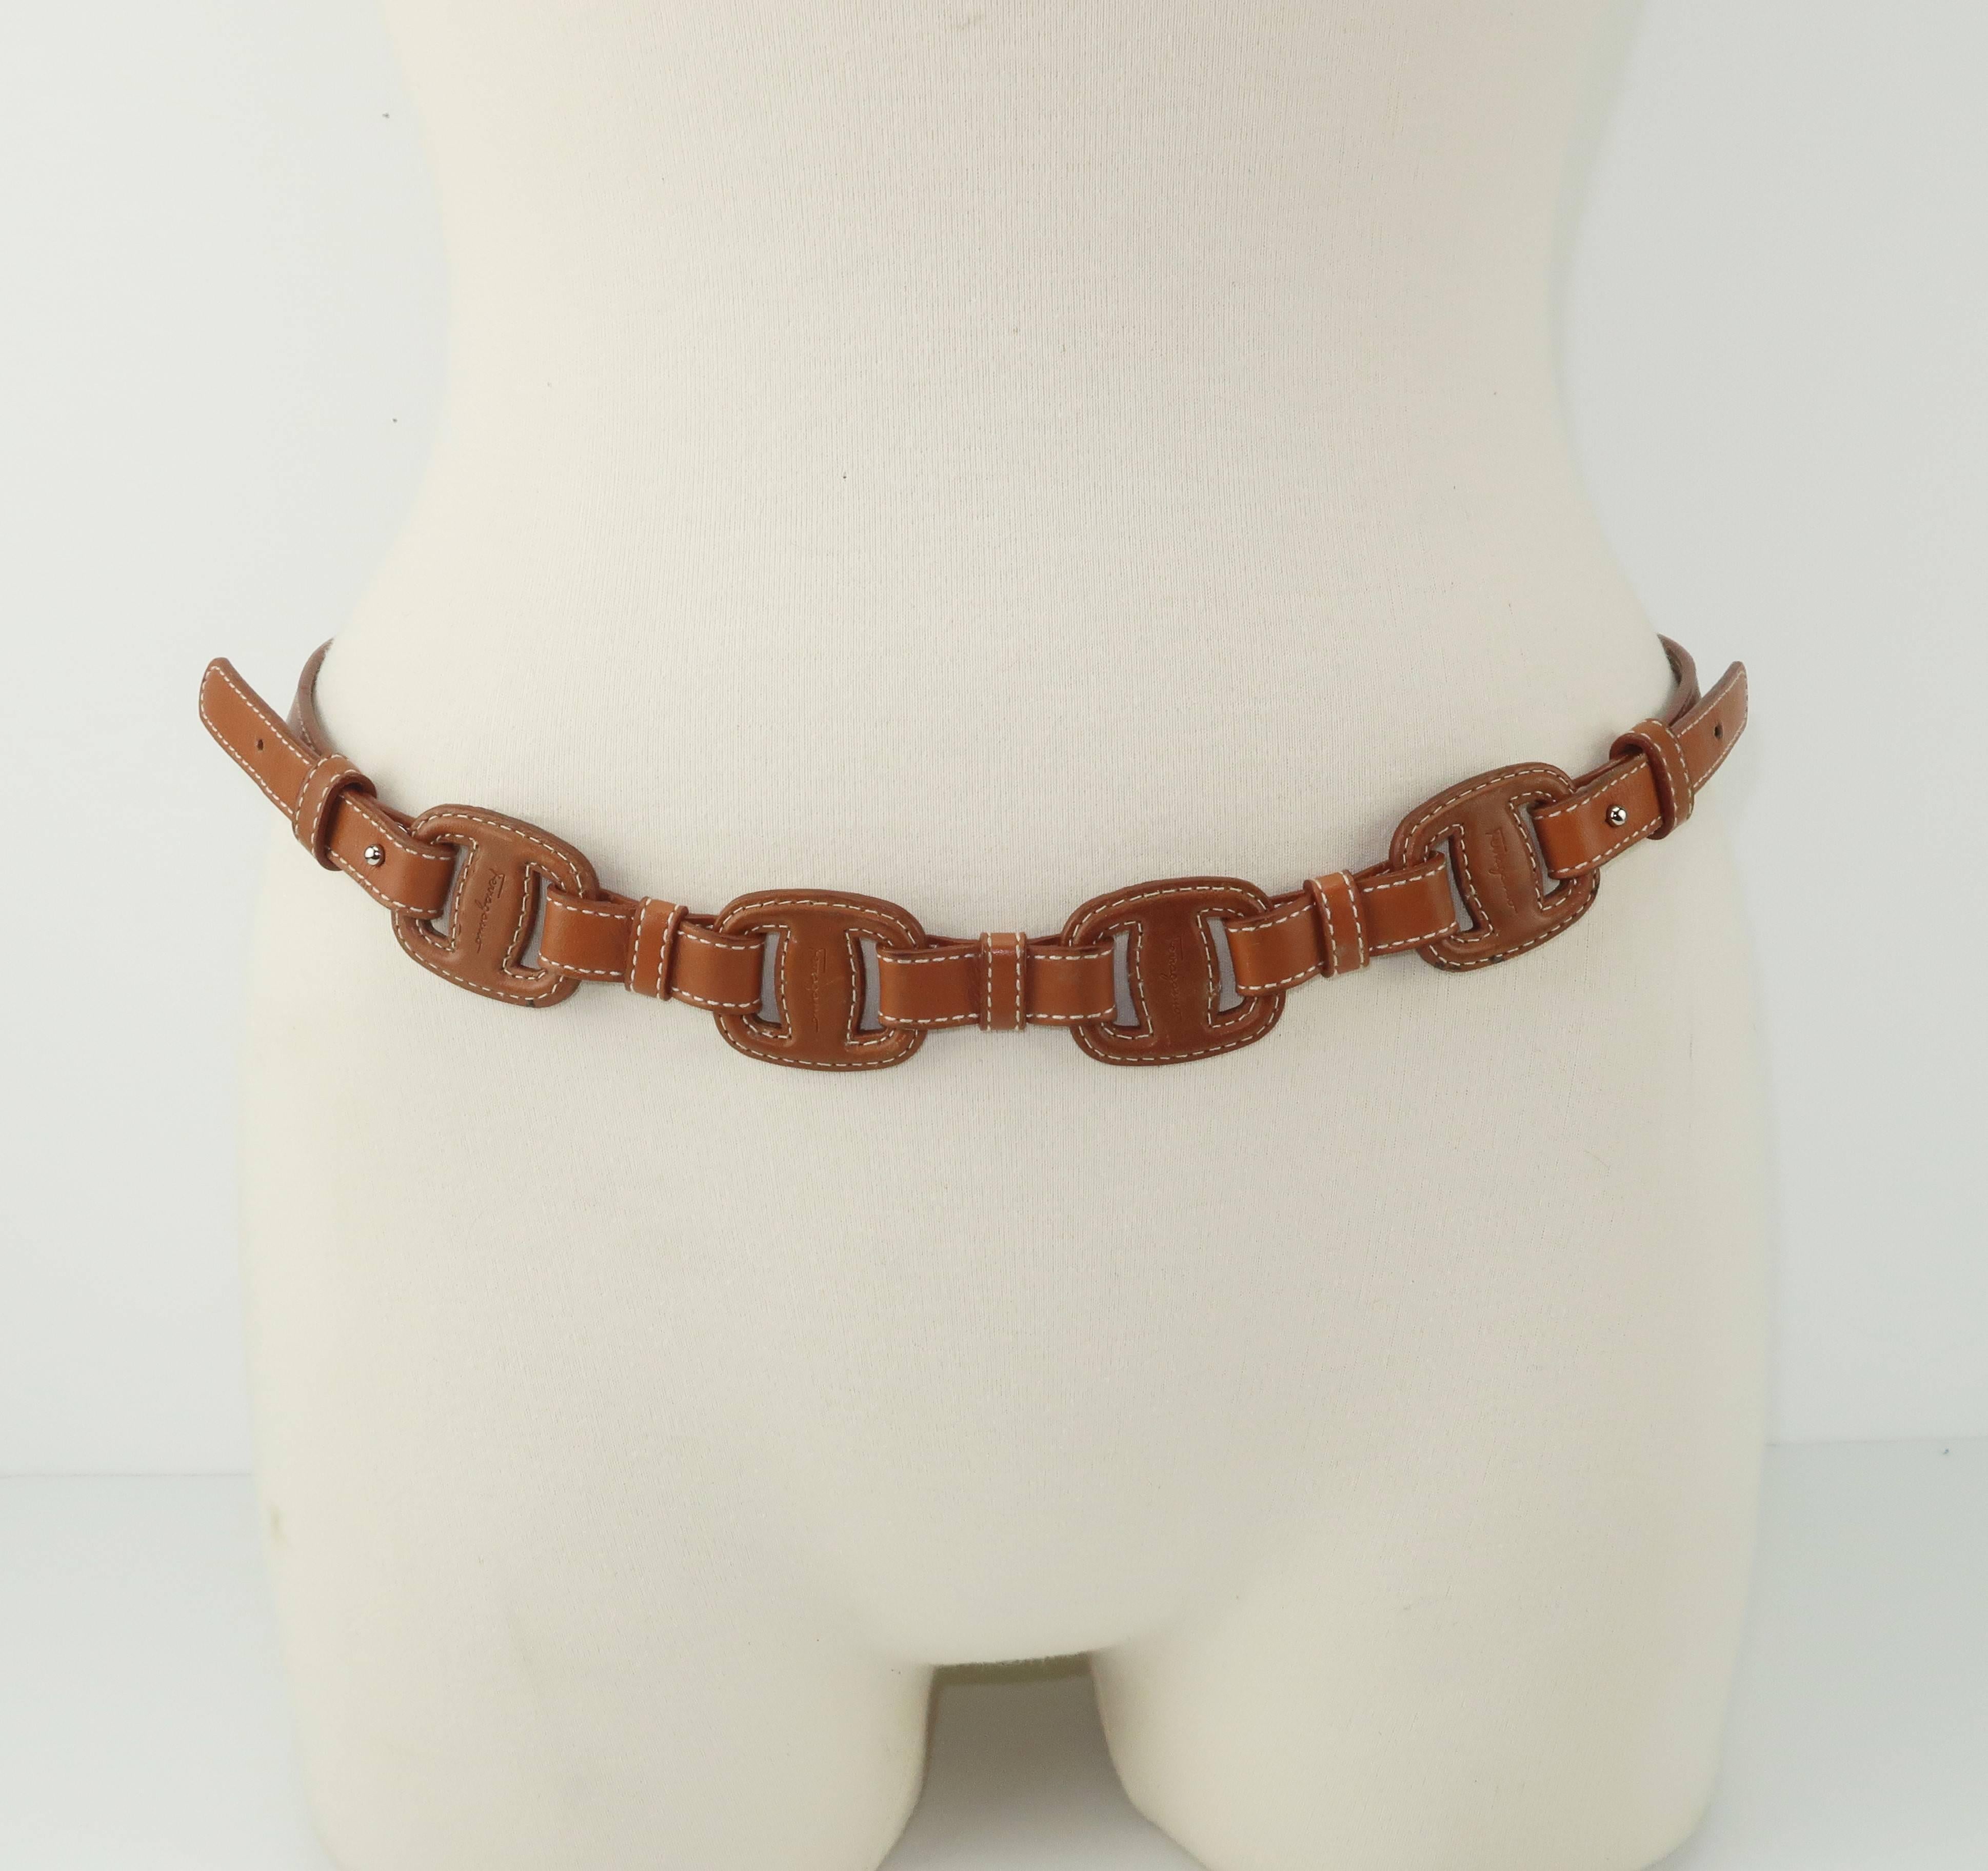 Ferragamo creates a skinny tan leather belt with the look of a bridle lending it an equestrian vibe.  The versatile tan leather is designed with two adjustable sides providing for three options on each end.  The Ferragamo name is embossed on both